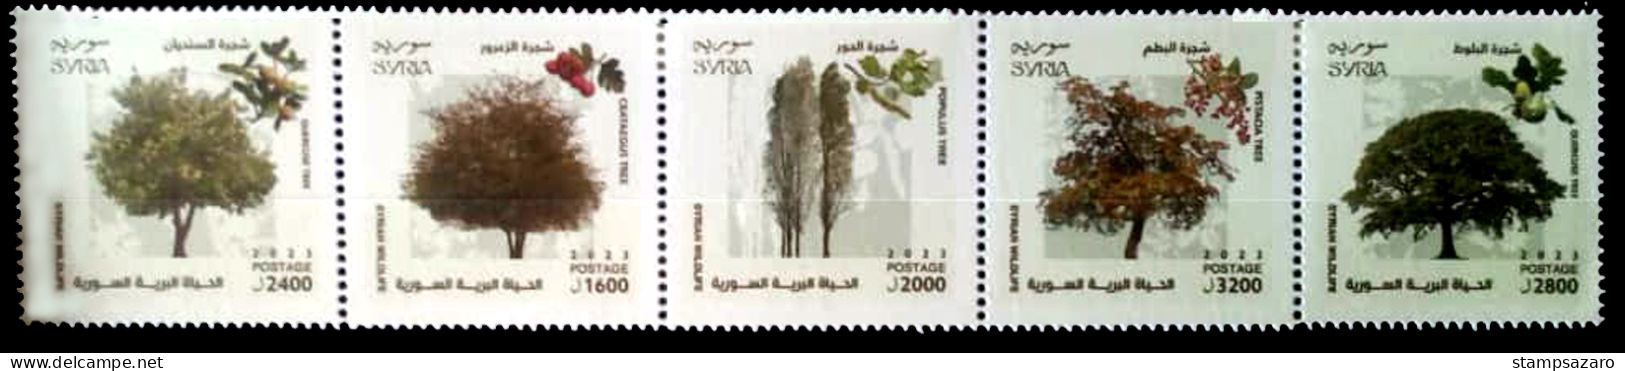 Syrie , Syrien , Syria 2023 New Issued Syrian Wildlife, Complete Set, MNH** - Syrien